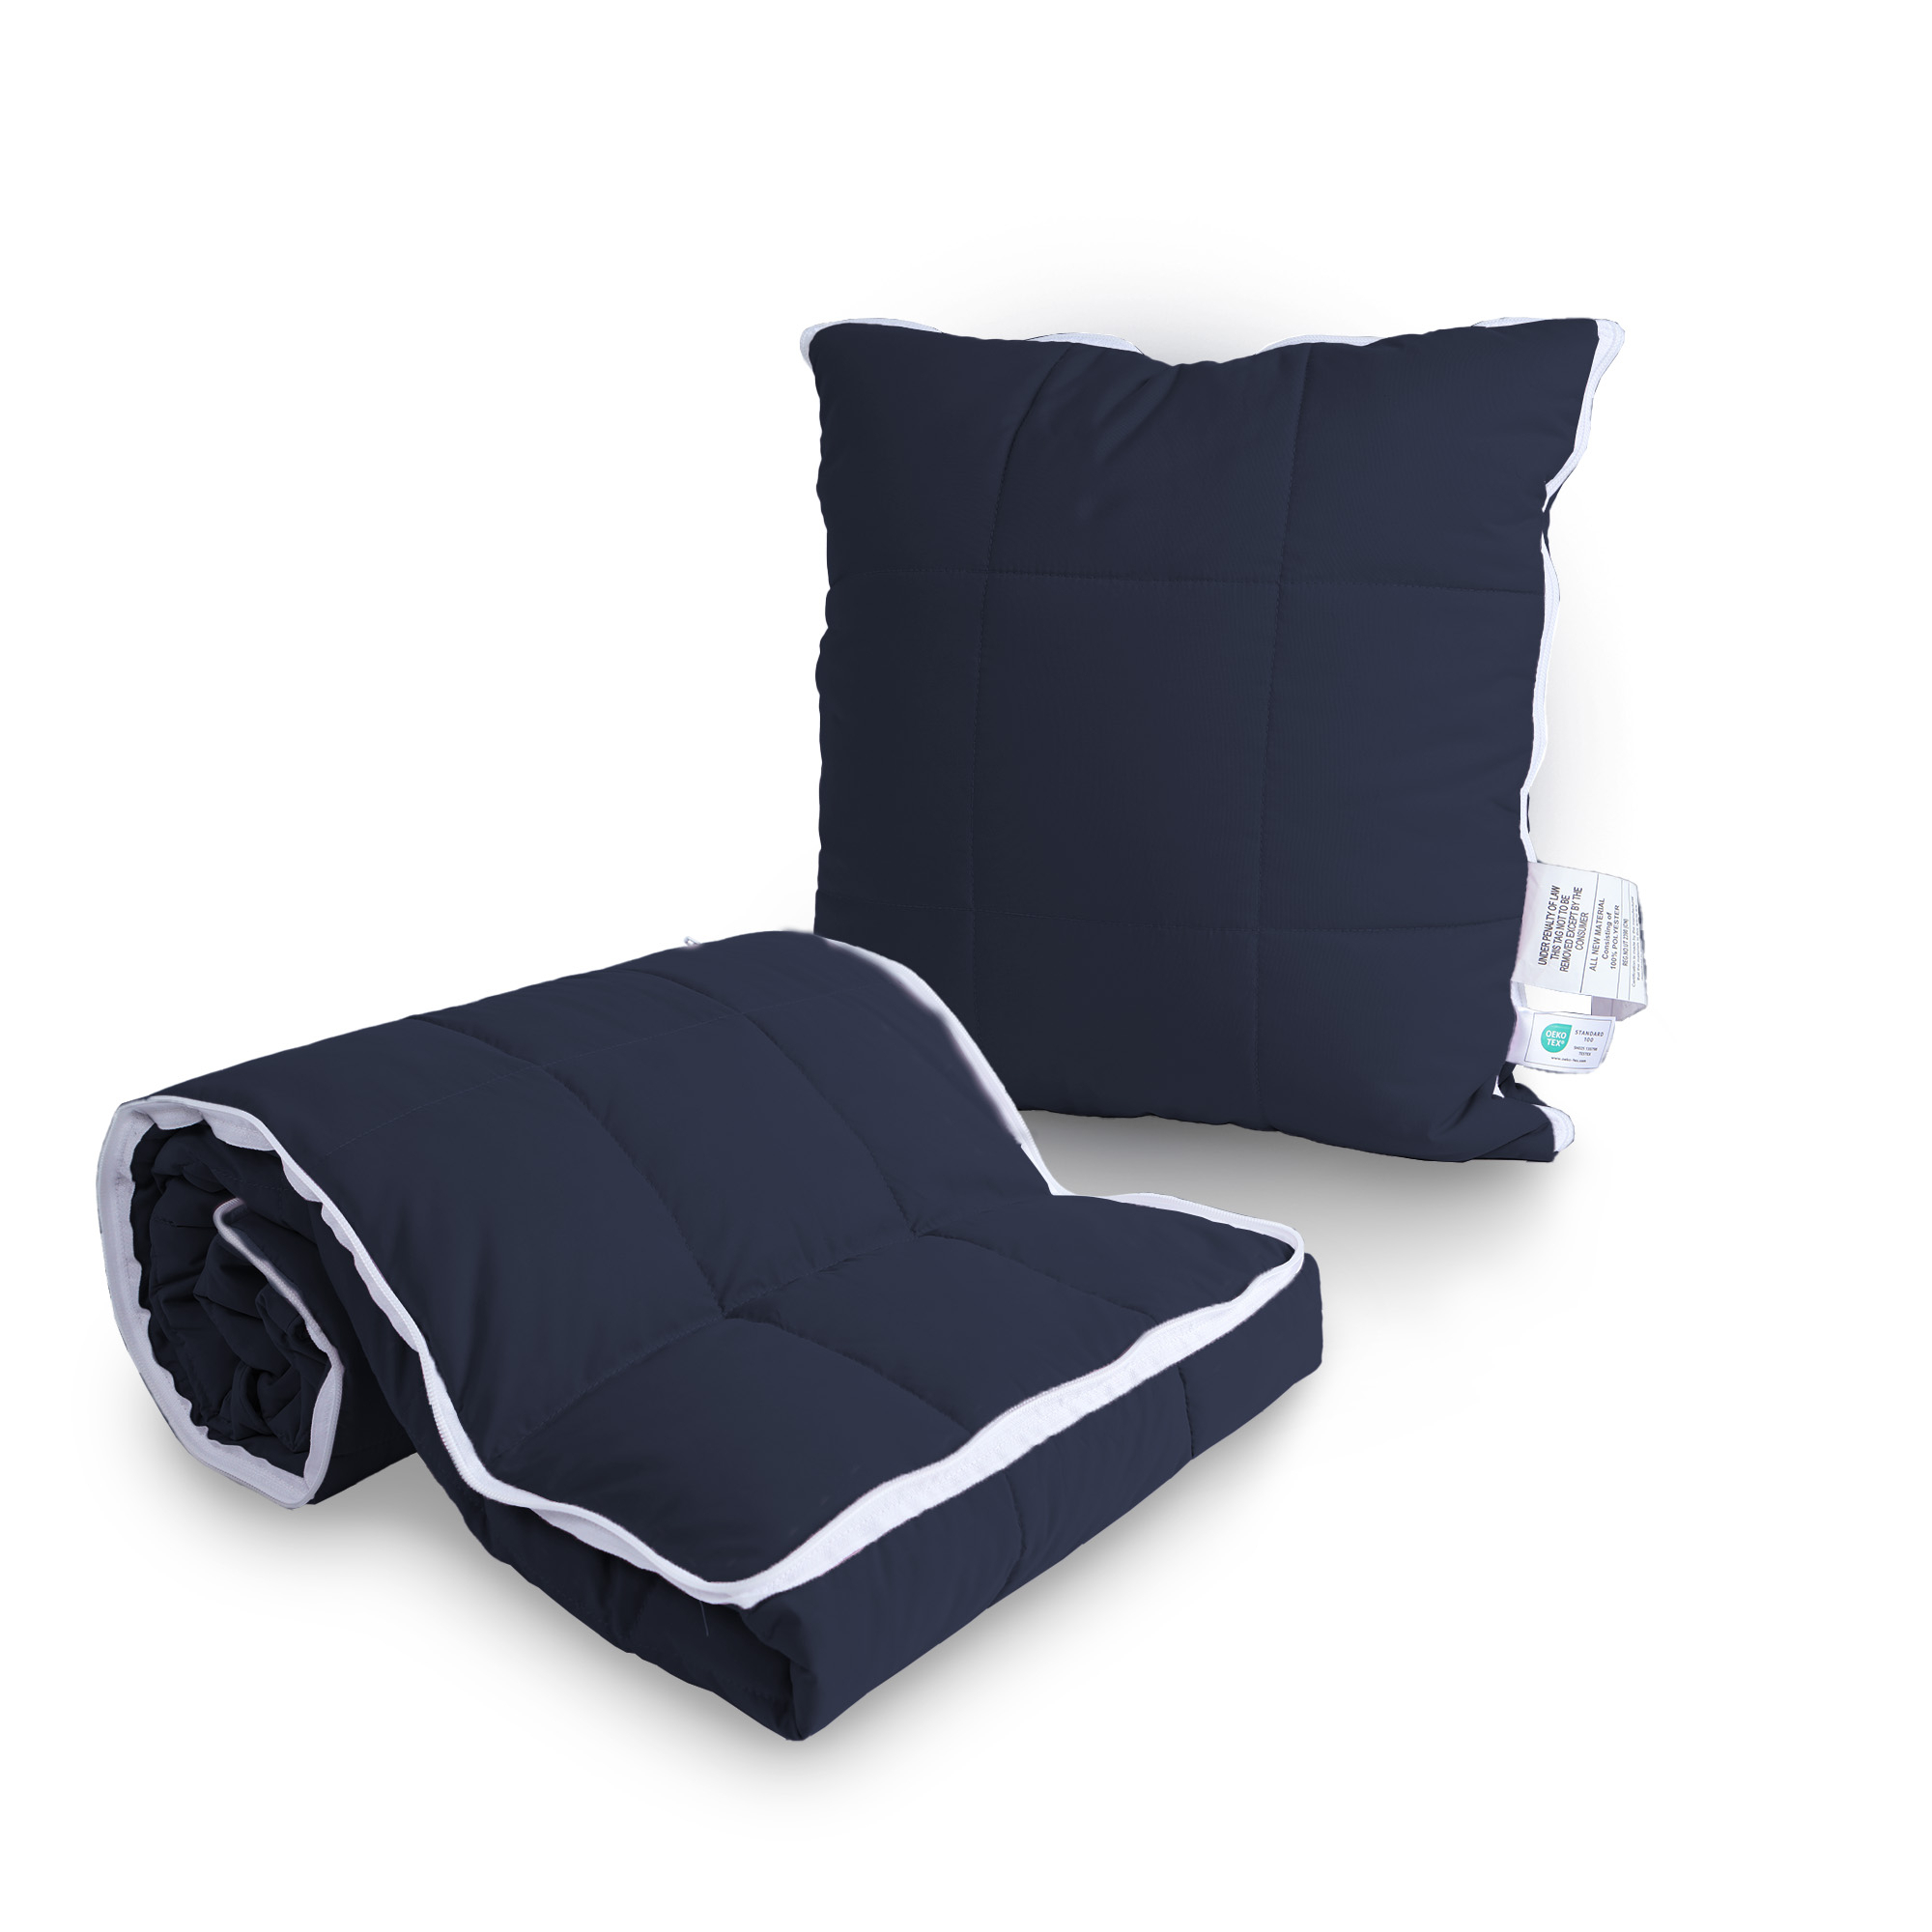 Lightweight Packable Ultra Soft Down Alternative Throw Blanket, 50W X 70L - Cozy And Portable, Zippered Design - Navy, 50W X 70L